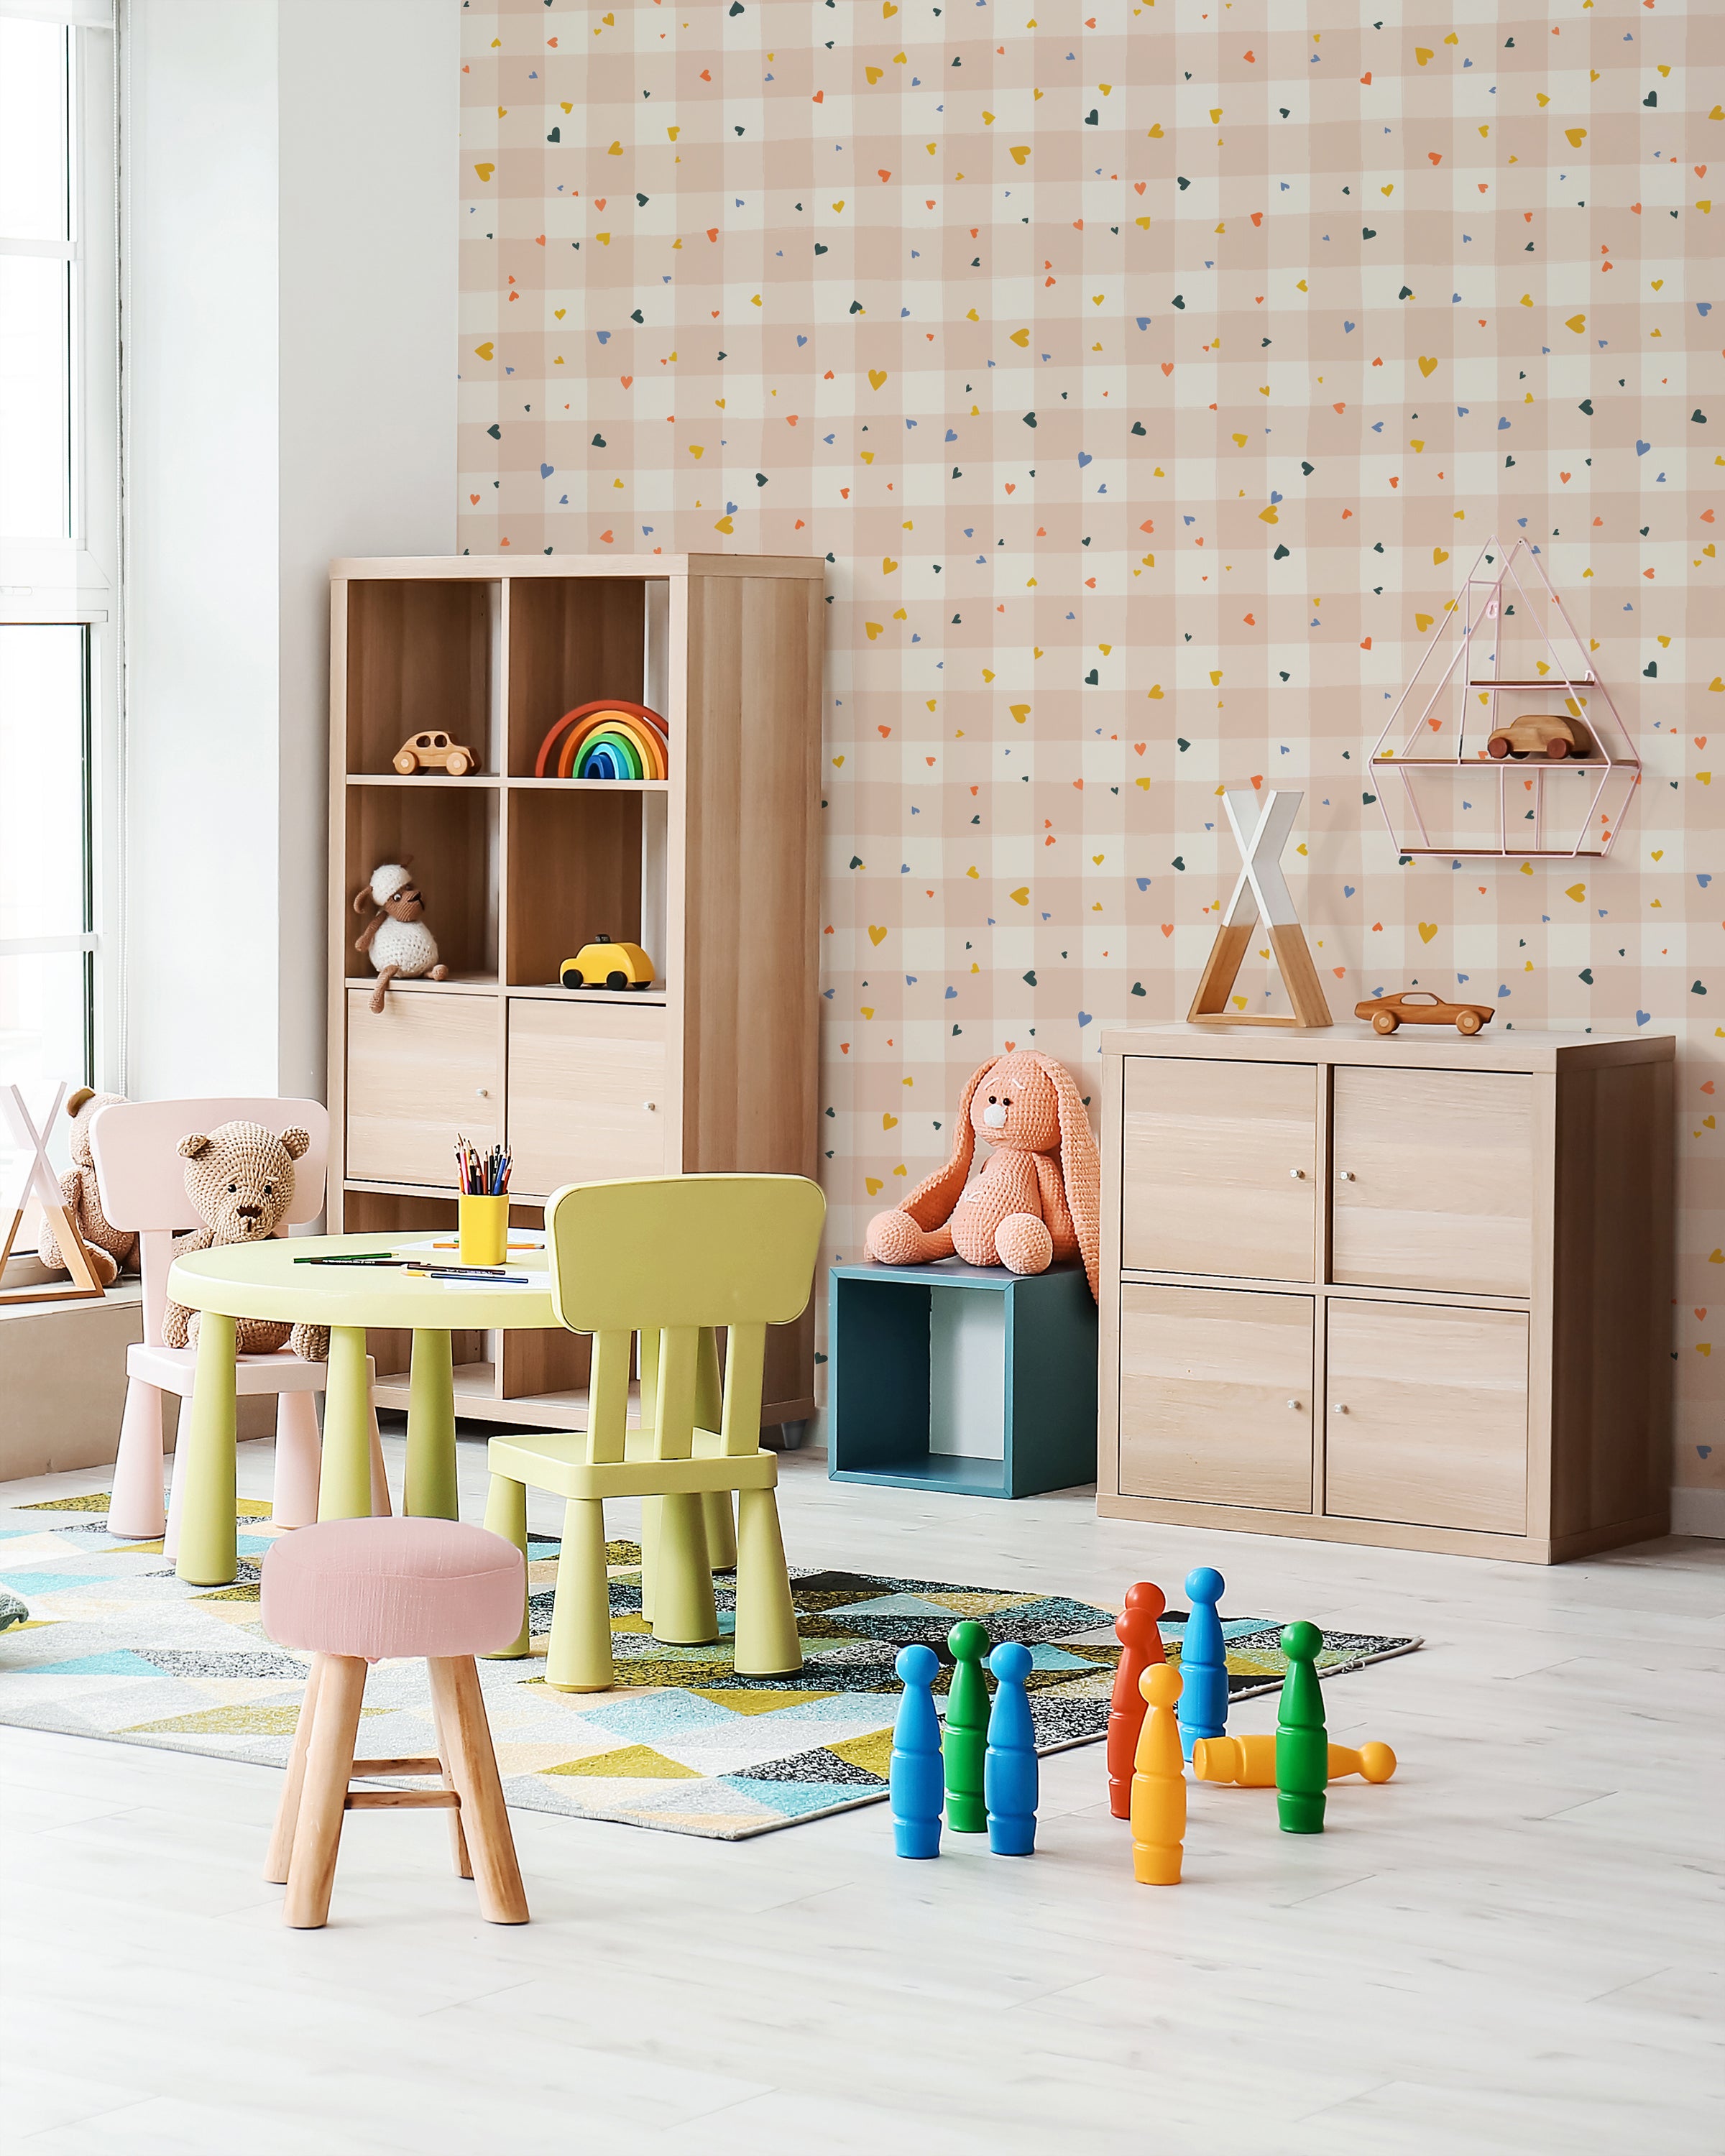 A children's playroom with walls covered in a cheerful pink wallpaper adorned with a colorful confetti-like pattern of triangles, paired with wooden furniture and bright toys